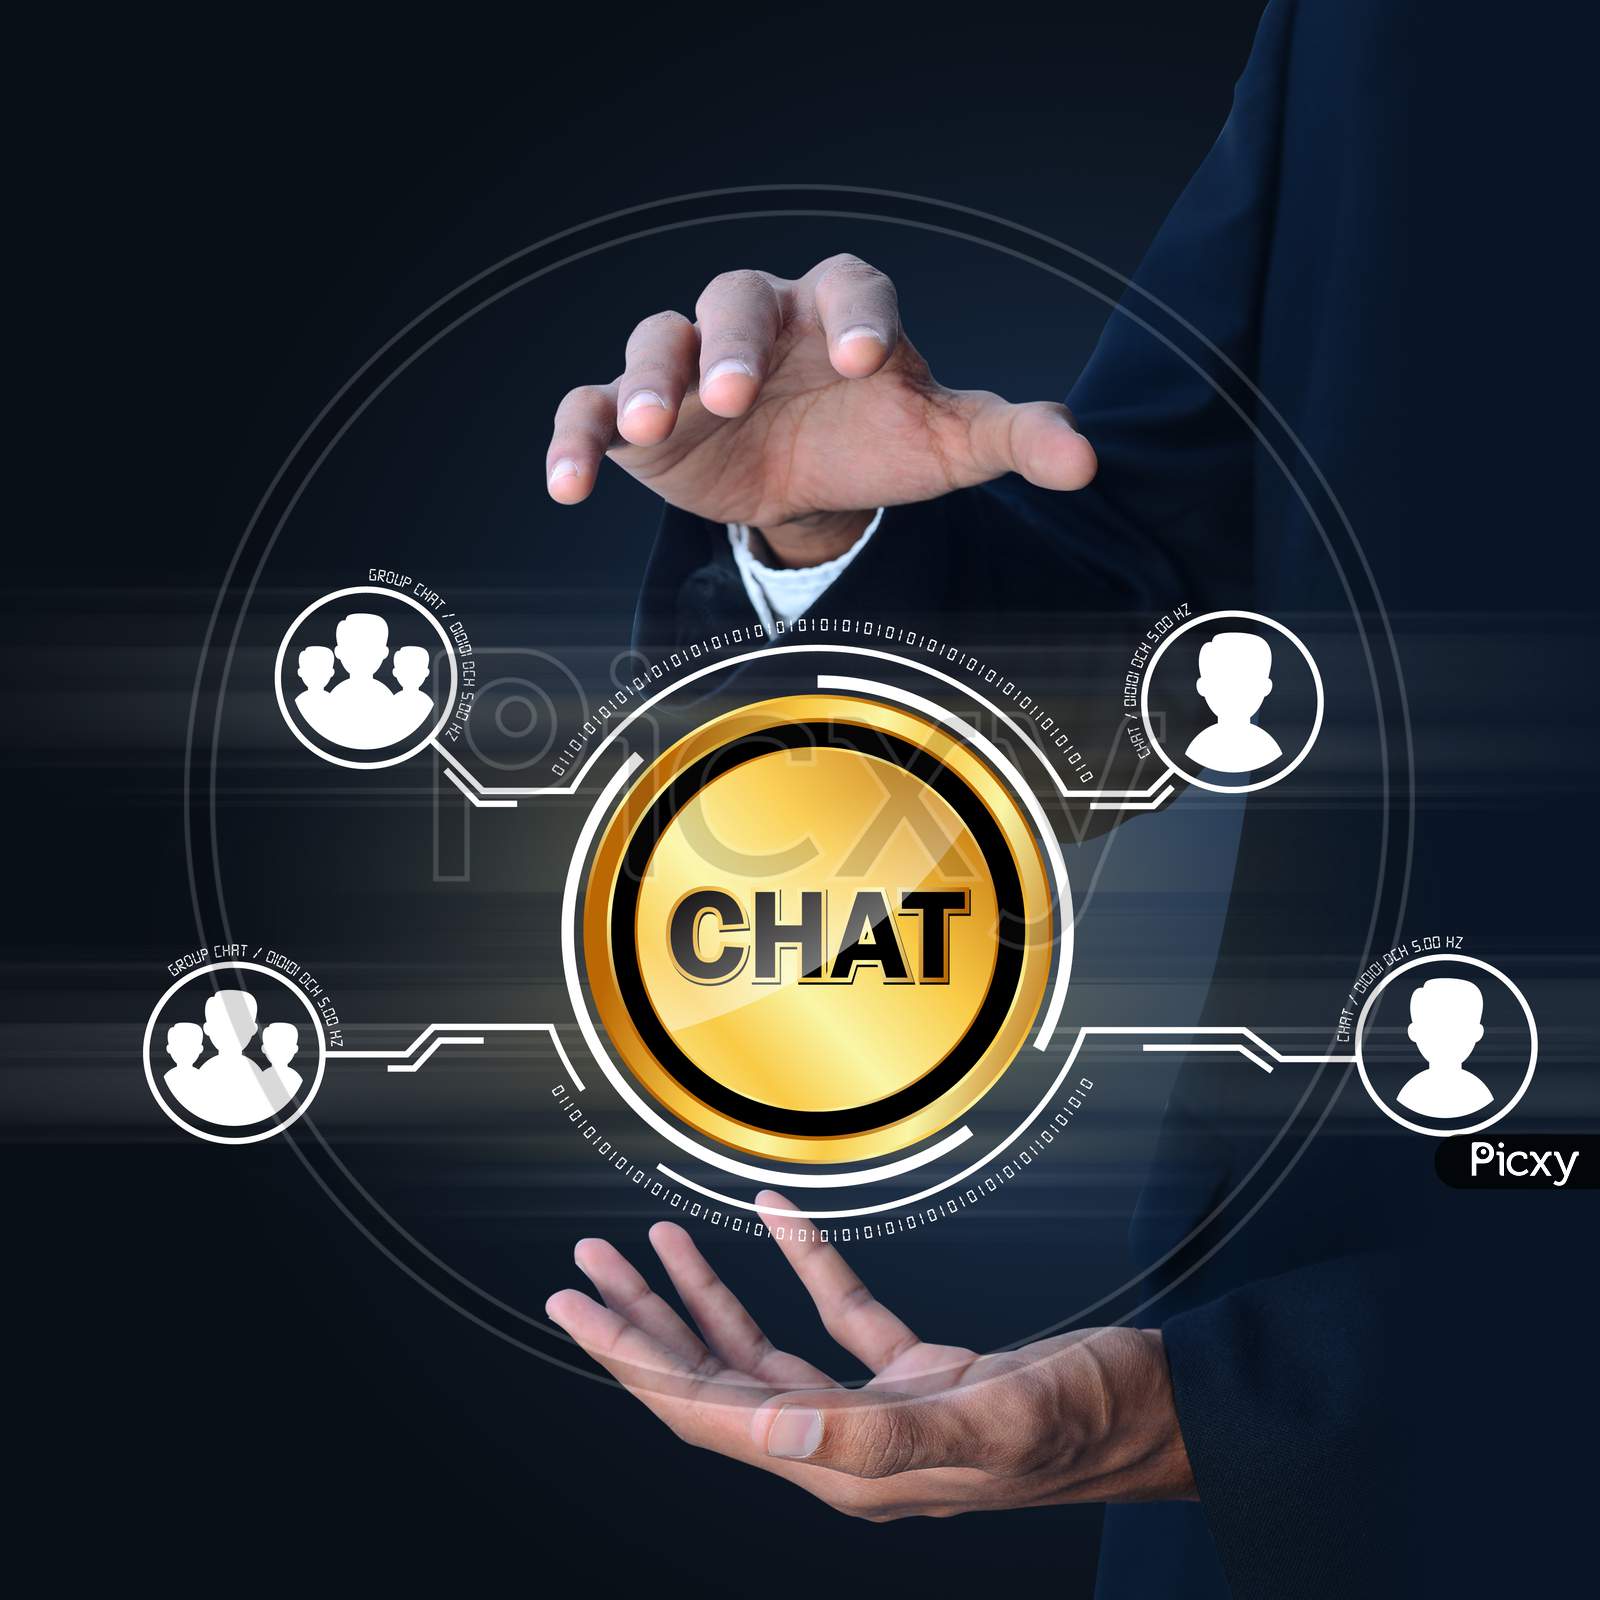 Close up shot of a Person's Hand with A Network or Chat